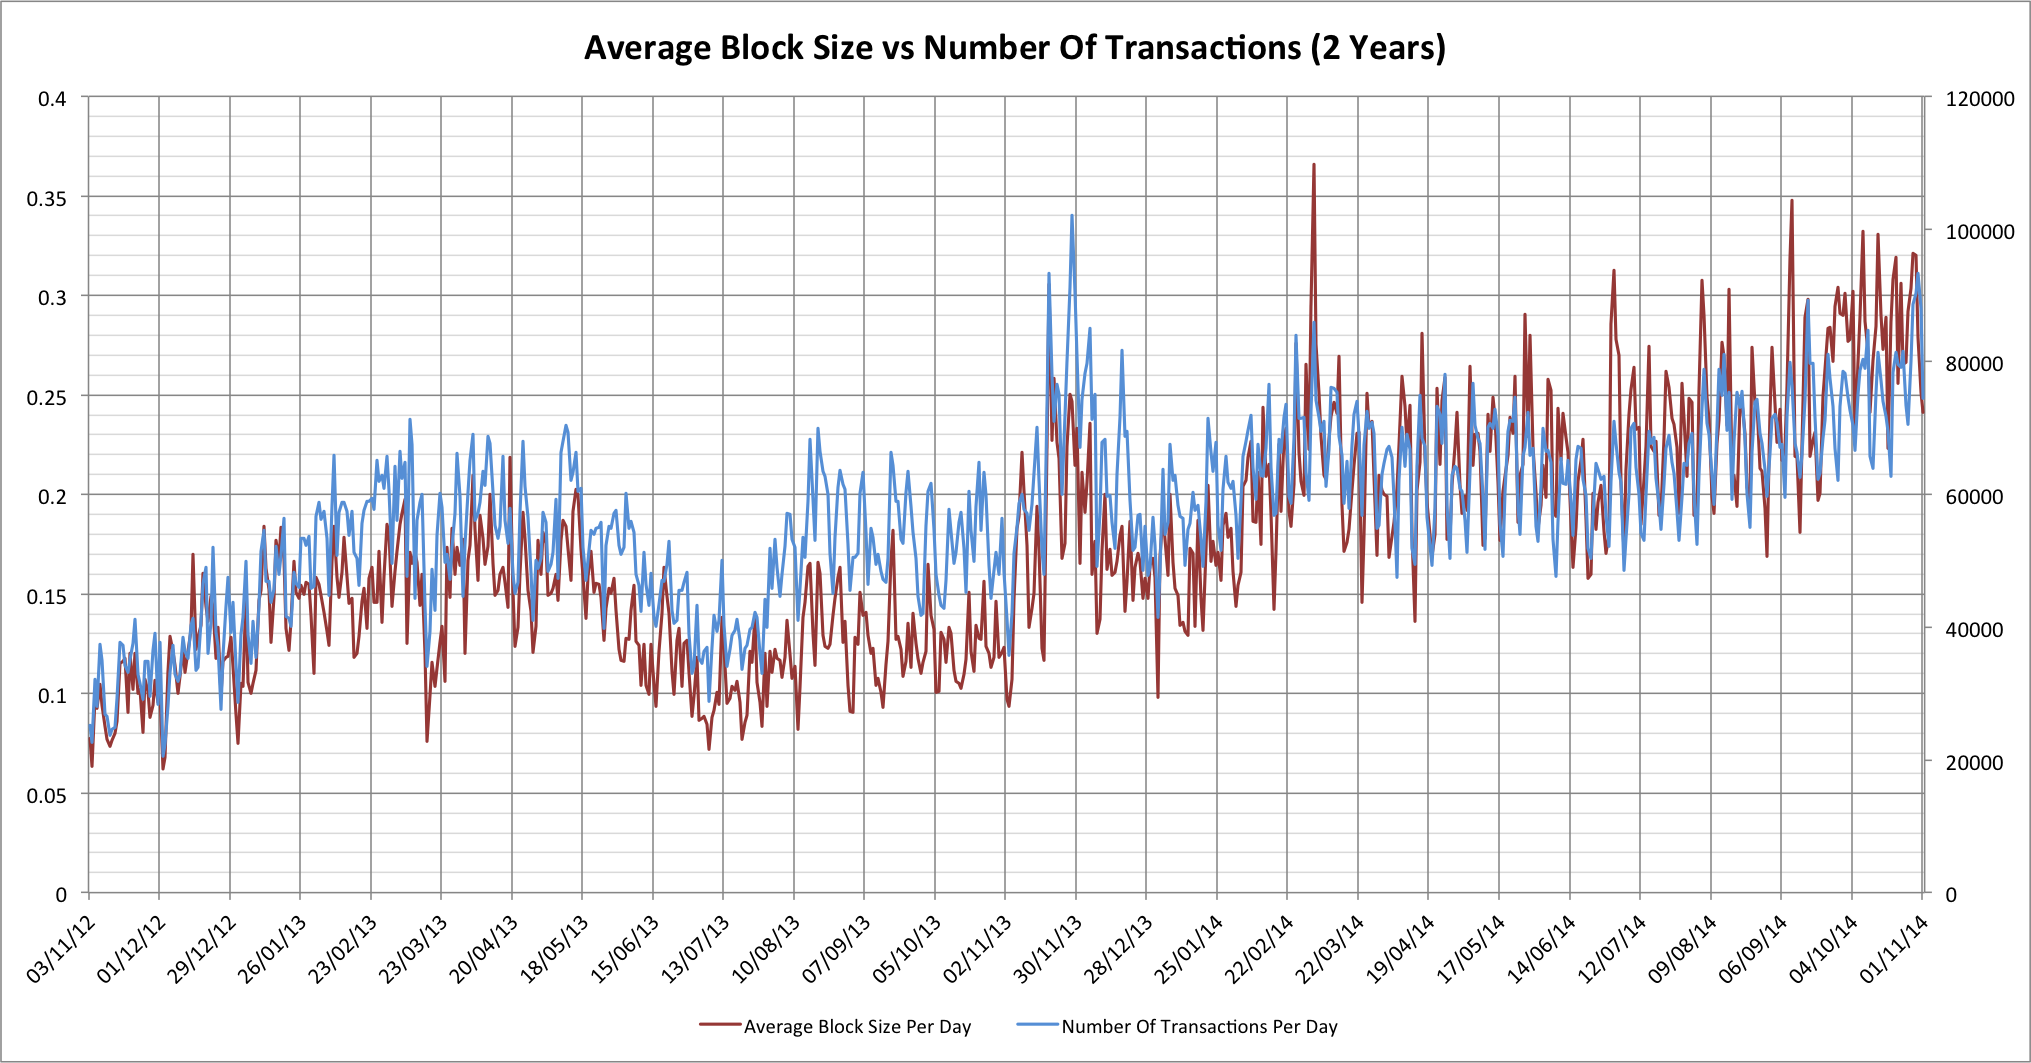 Comparison of average block size and transaction rate per day over the last 2 years